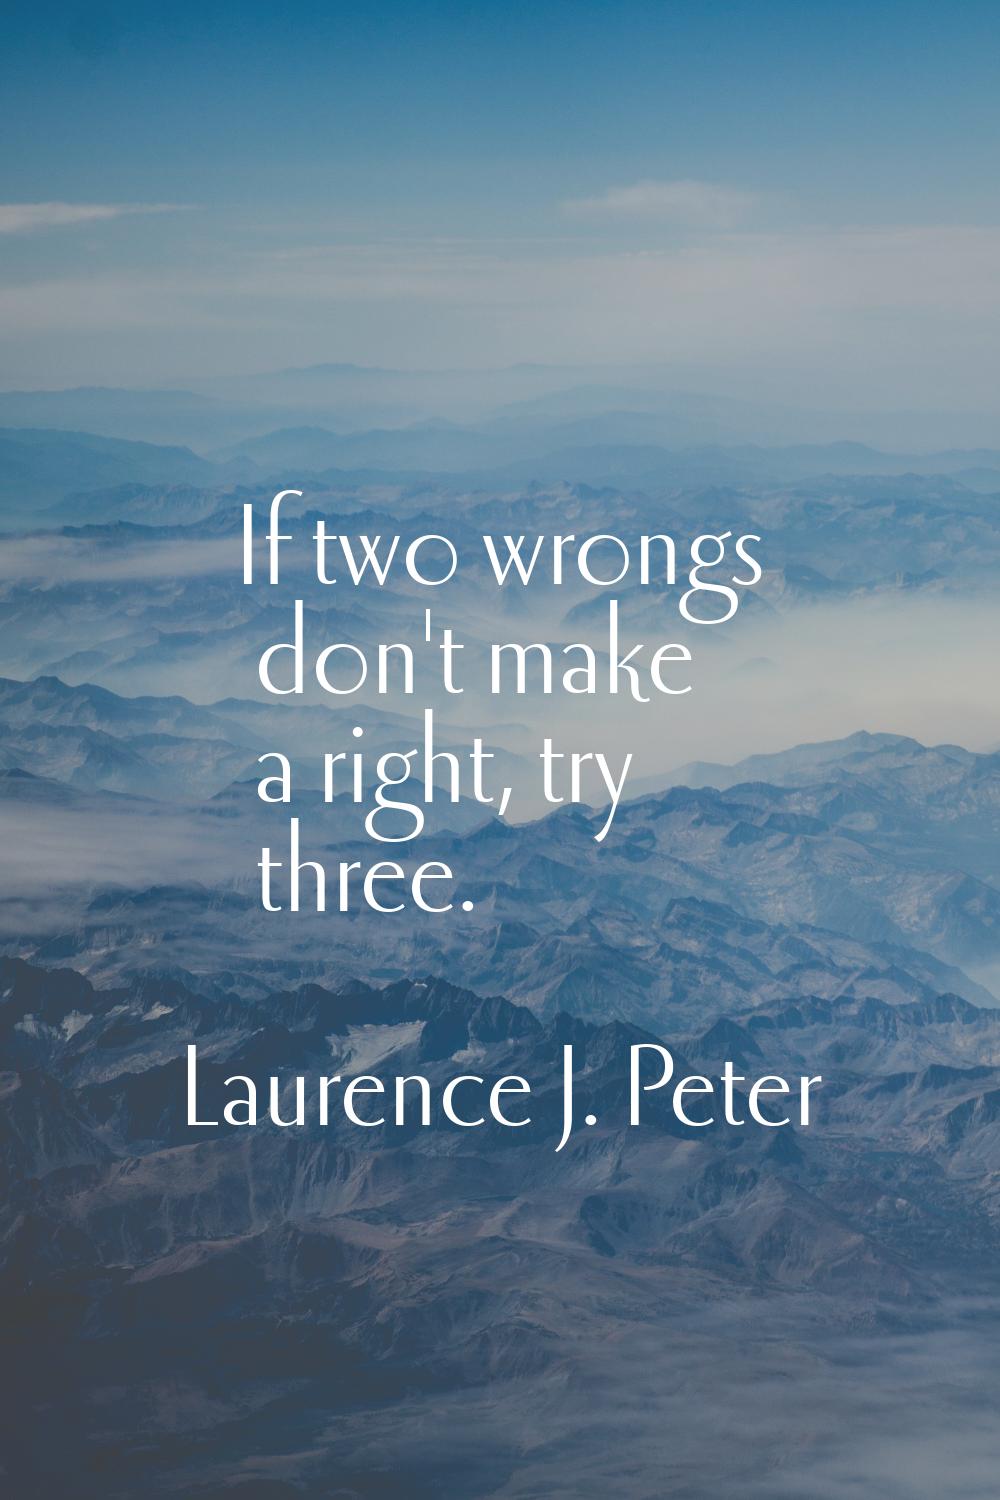 If two wrongs don't make a right, try three.